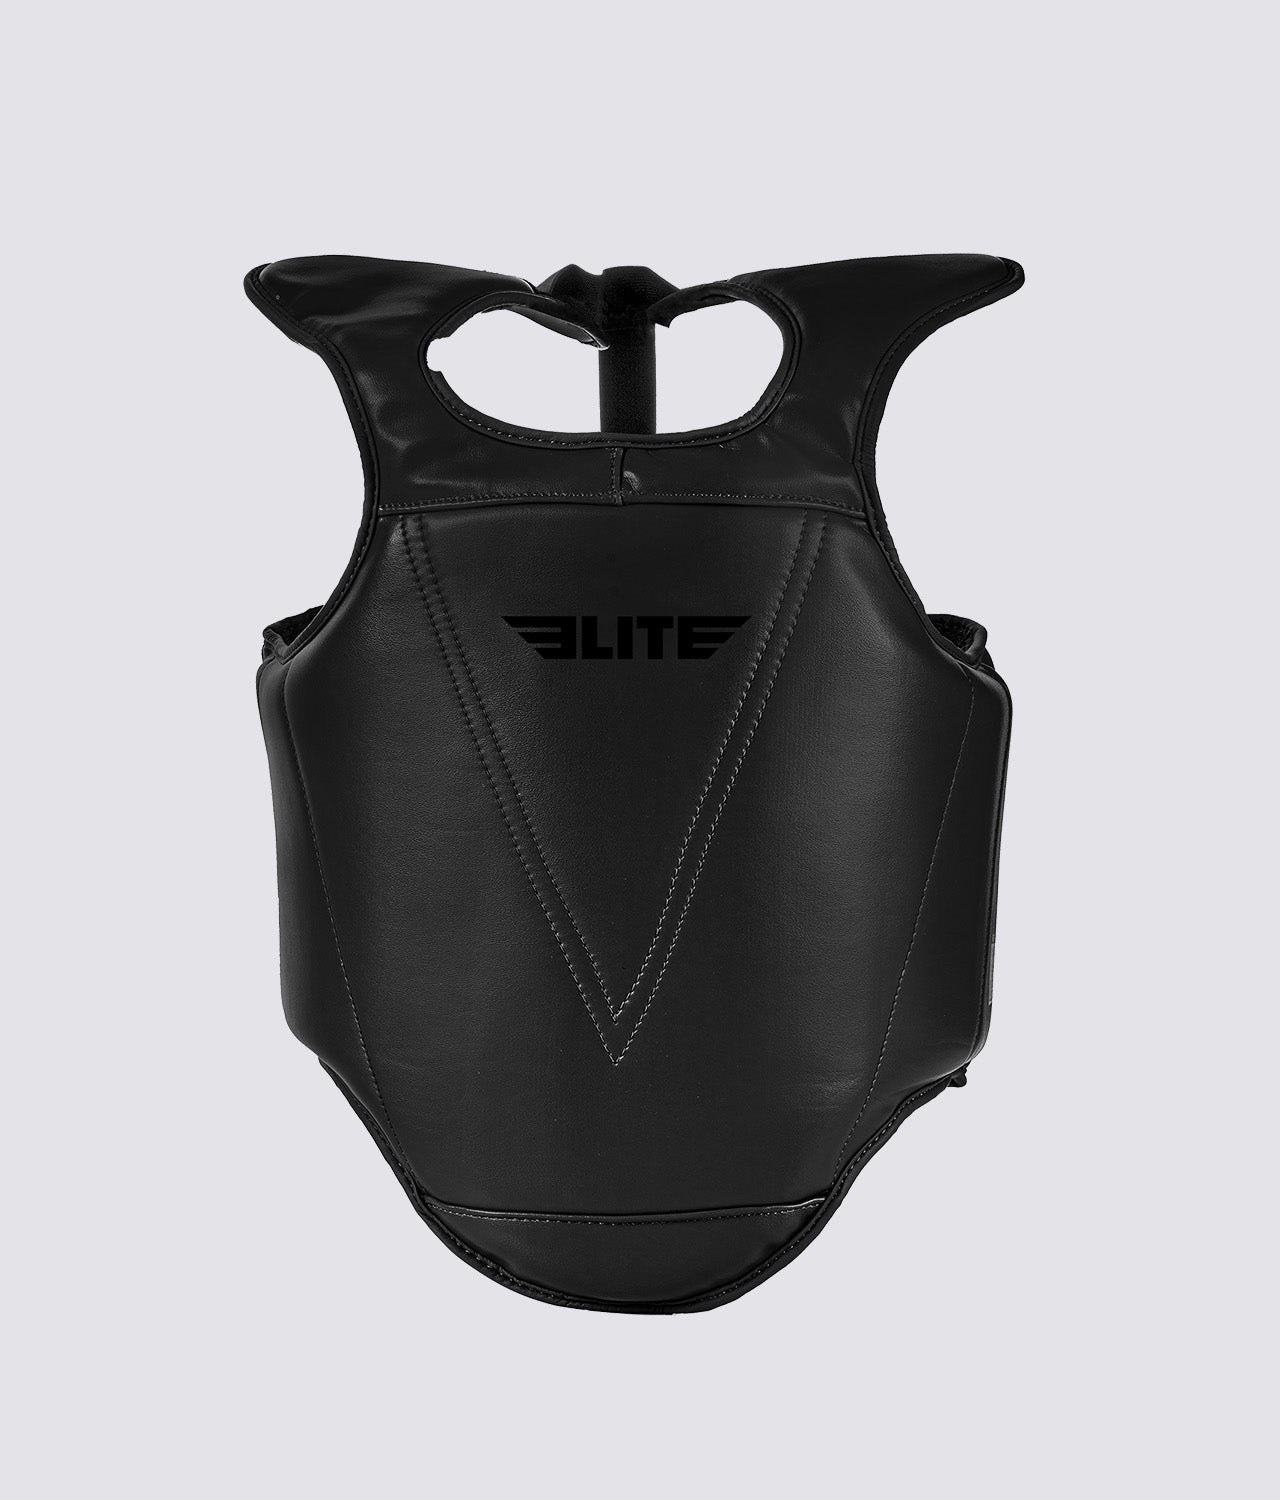 Kids' Black Boxing Chest Guard : 4 to 8 Years